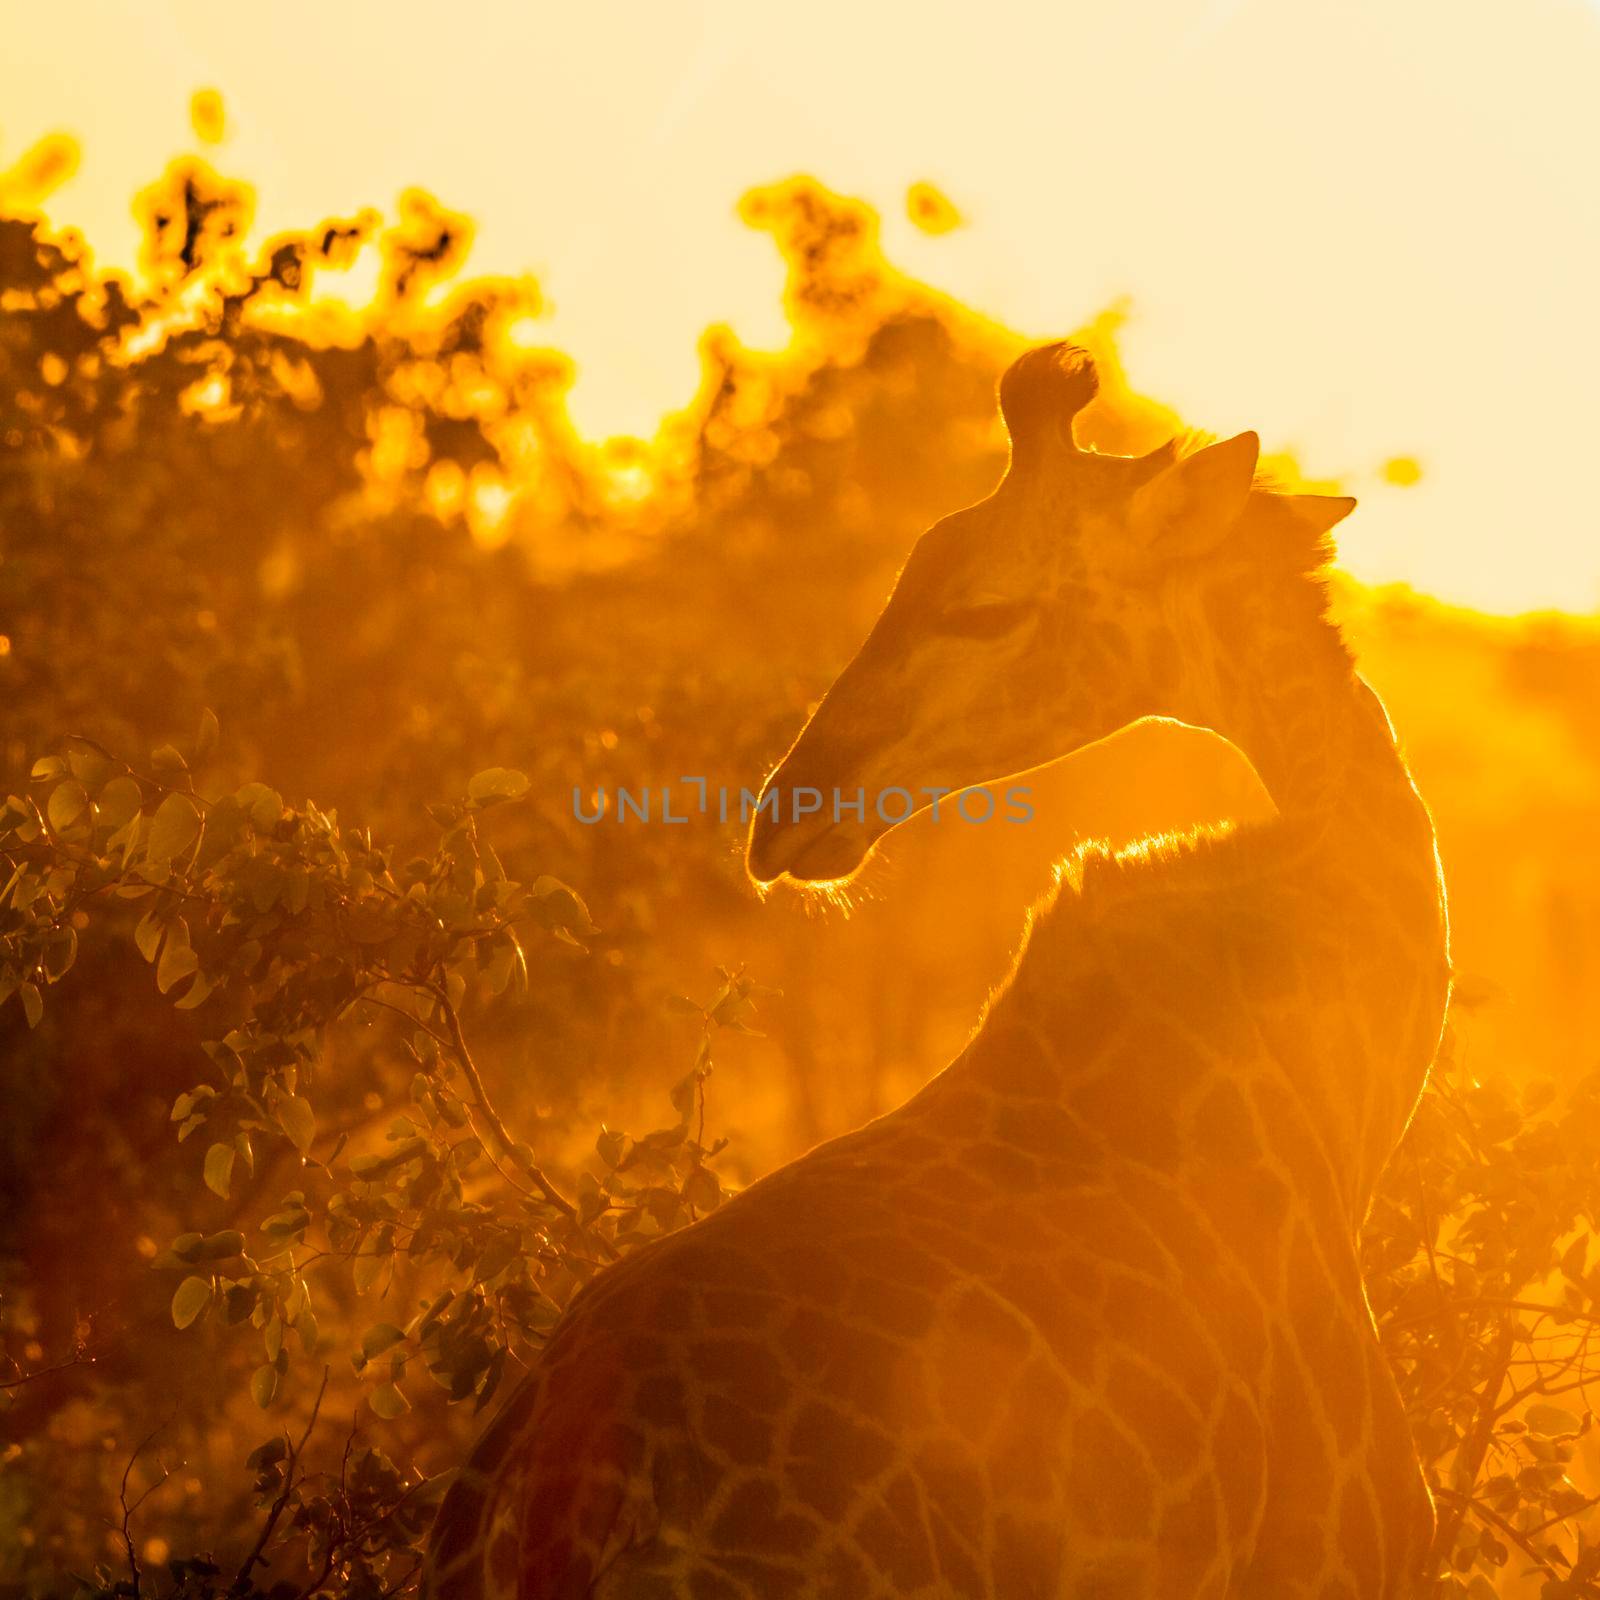 Giraffe in Kruger National park, South Africa by PACOCOMO